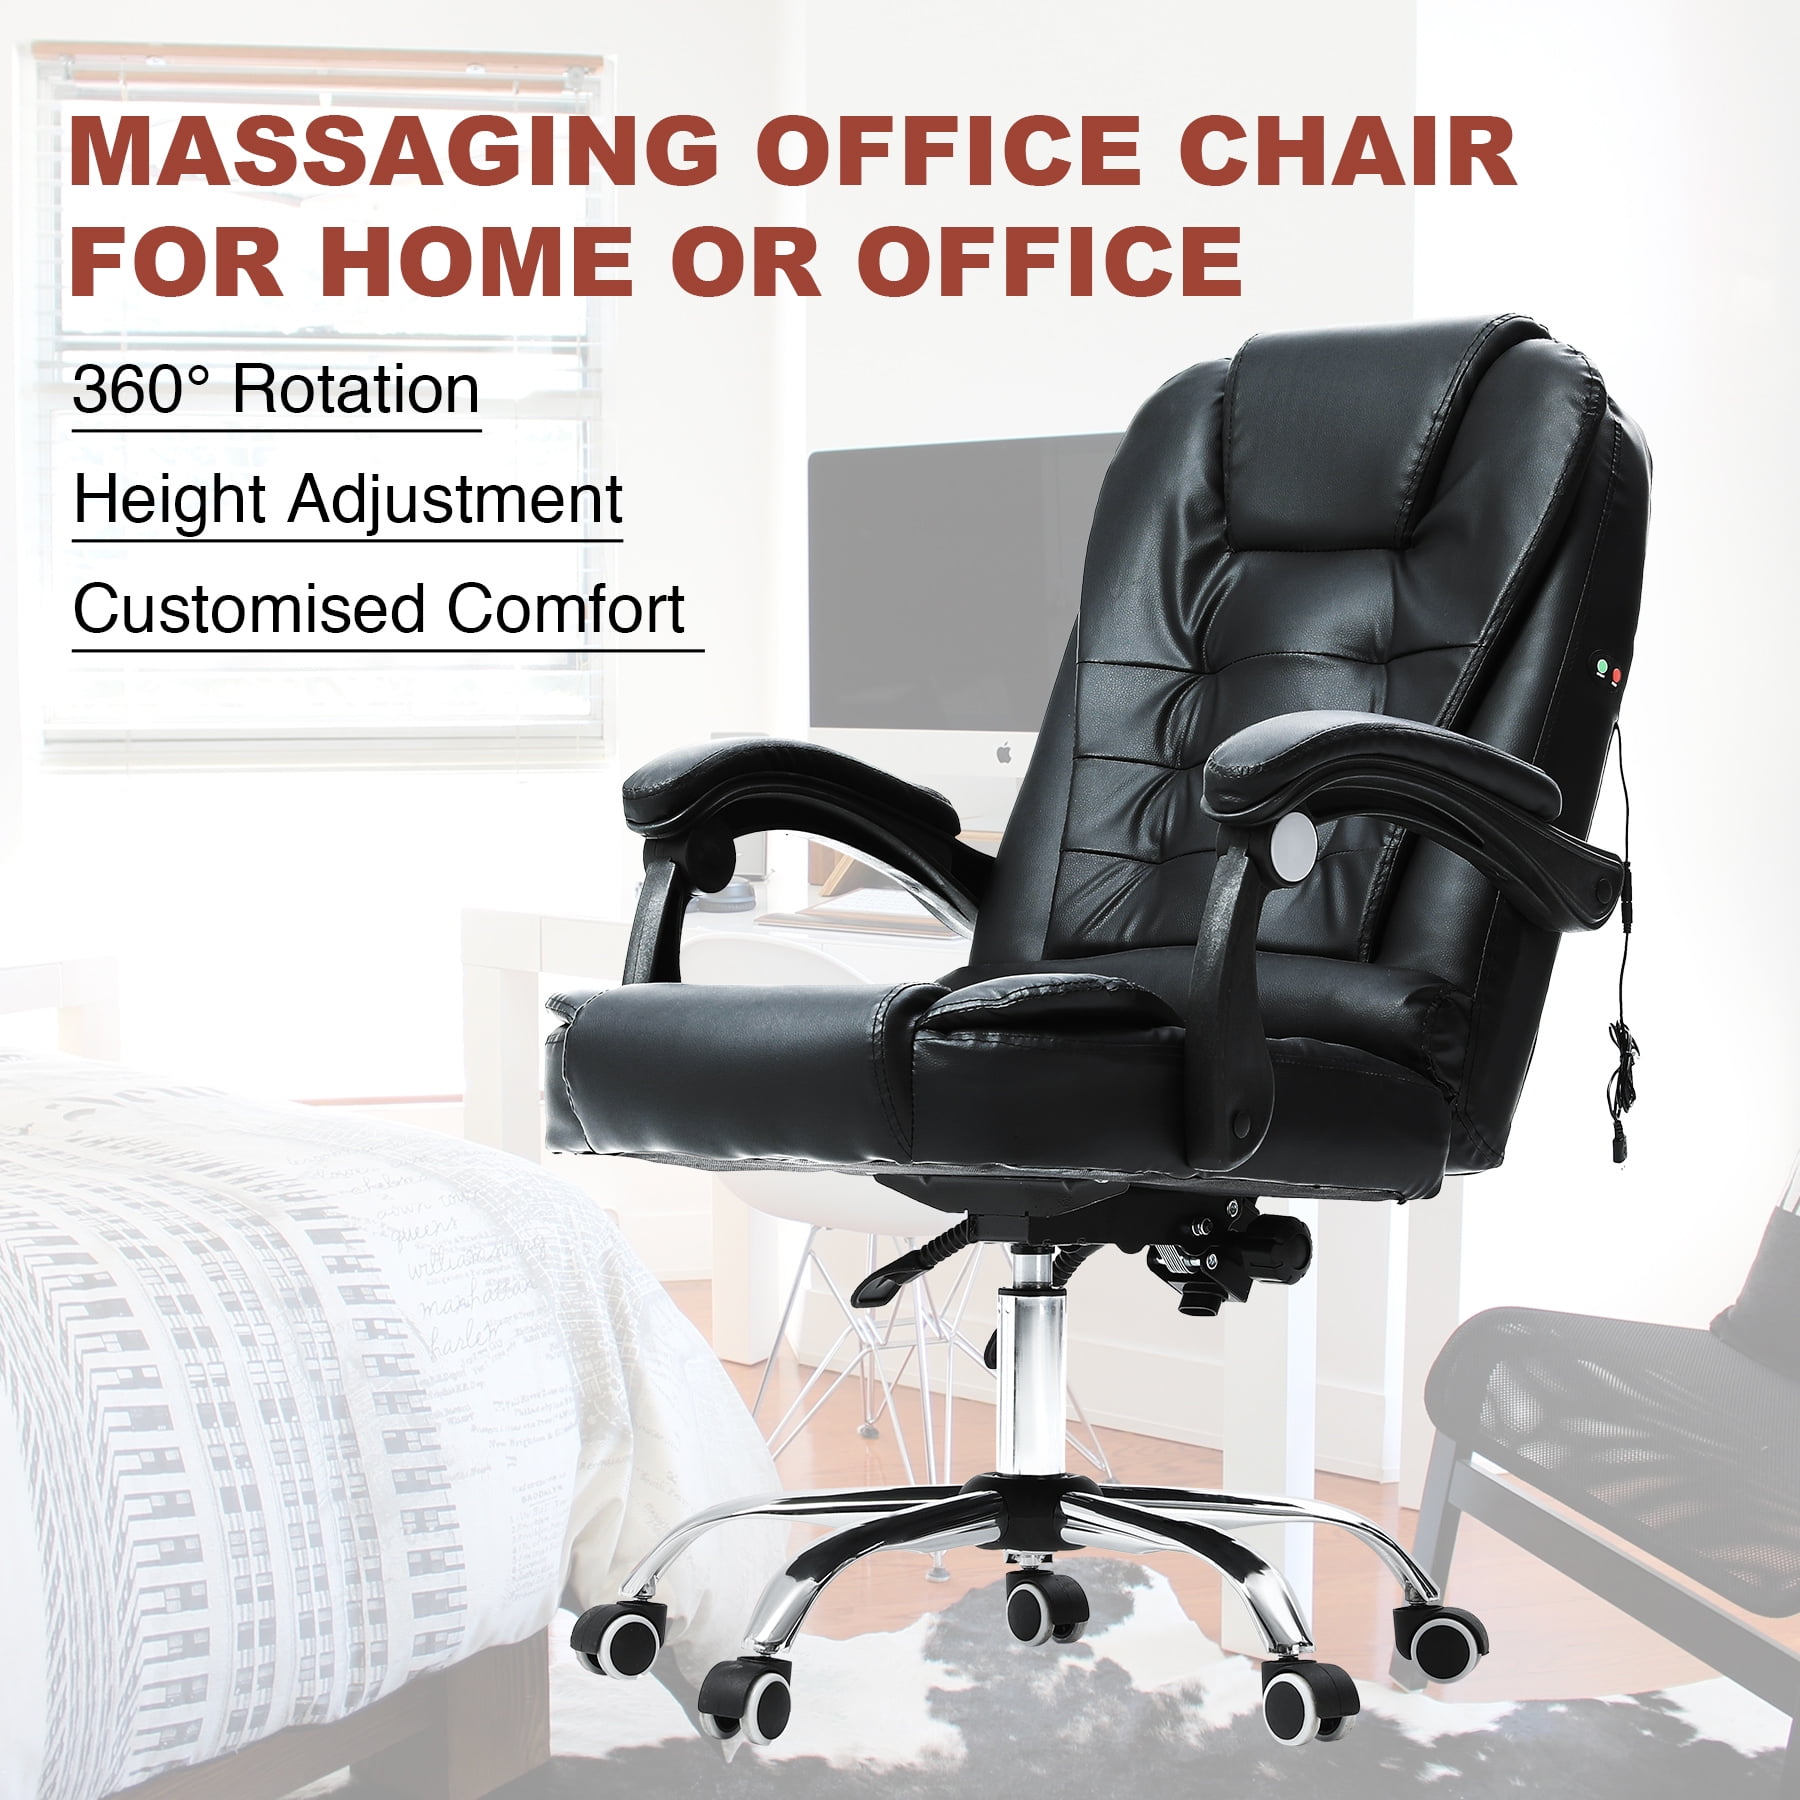 Height Adjustable Desk Chair Massage Office Chair with Recline Footrest Casters 